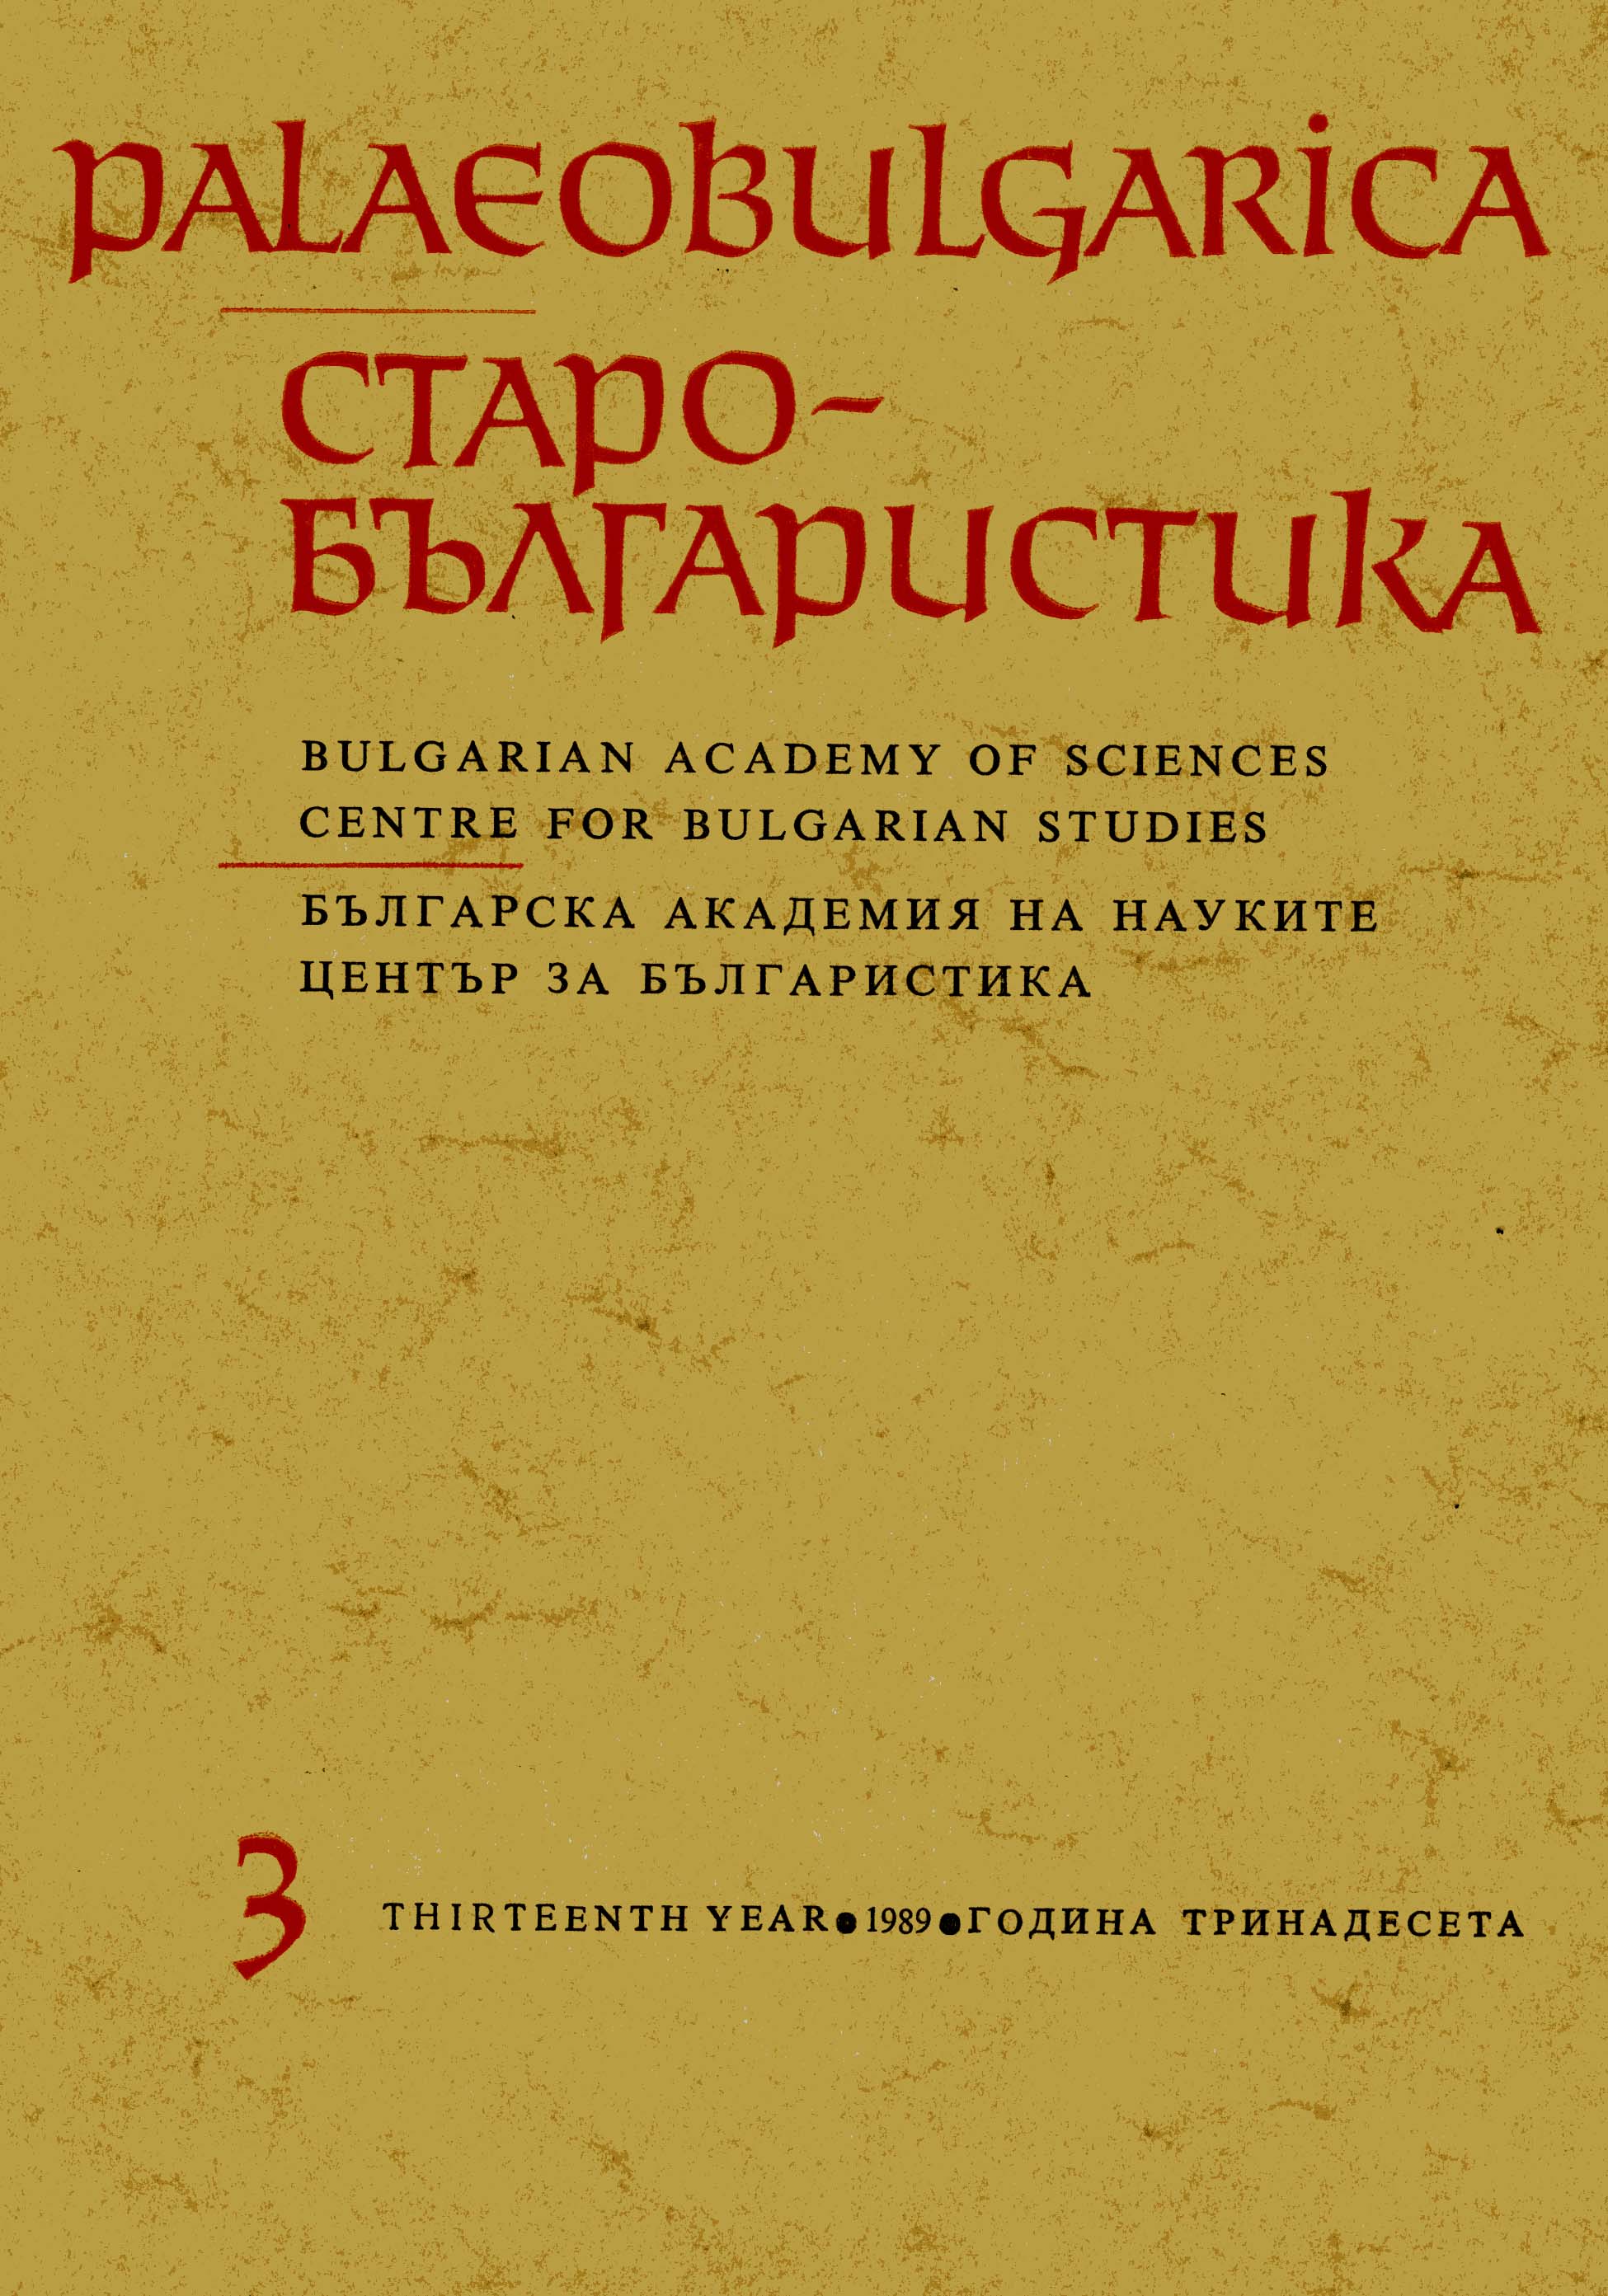 Parallels in the Socioeconomic Conditions of the Medieval Balkan States Cover Image